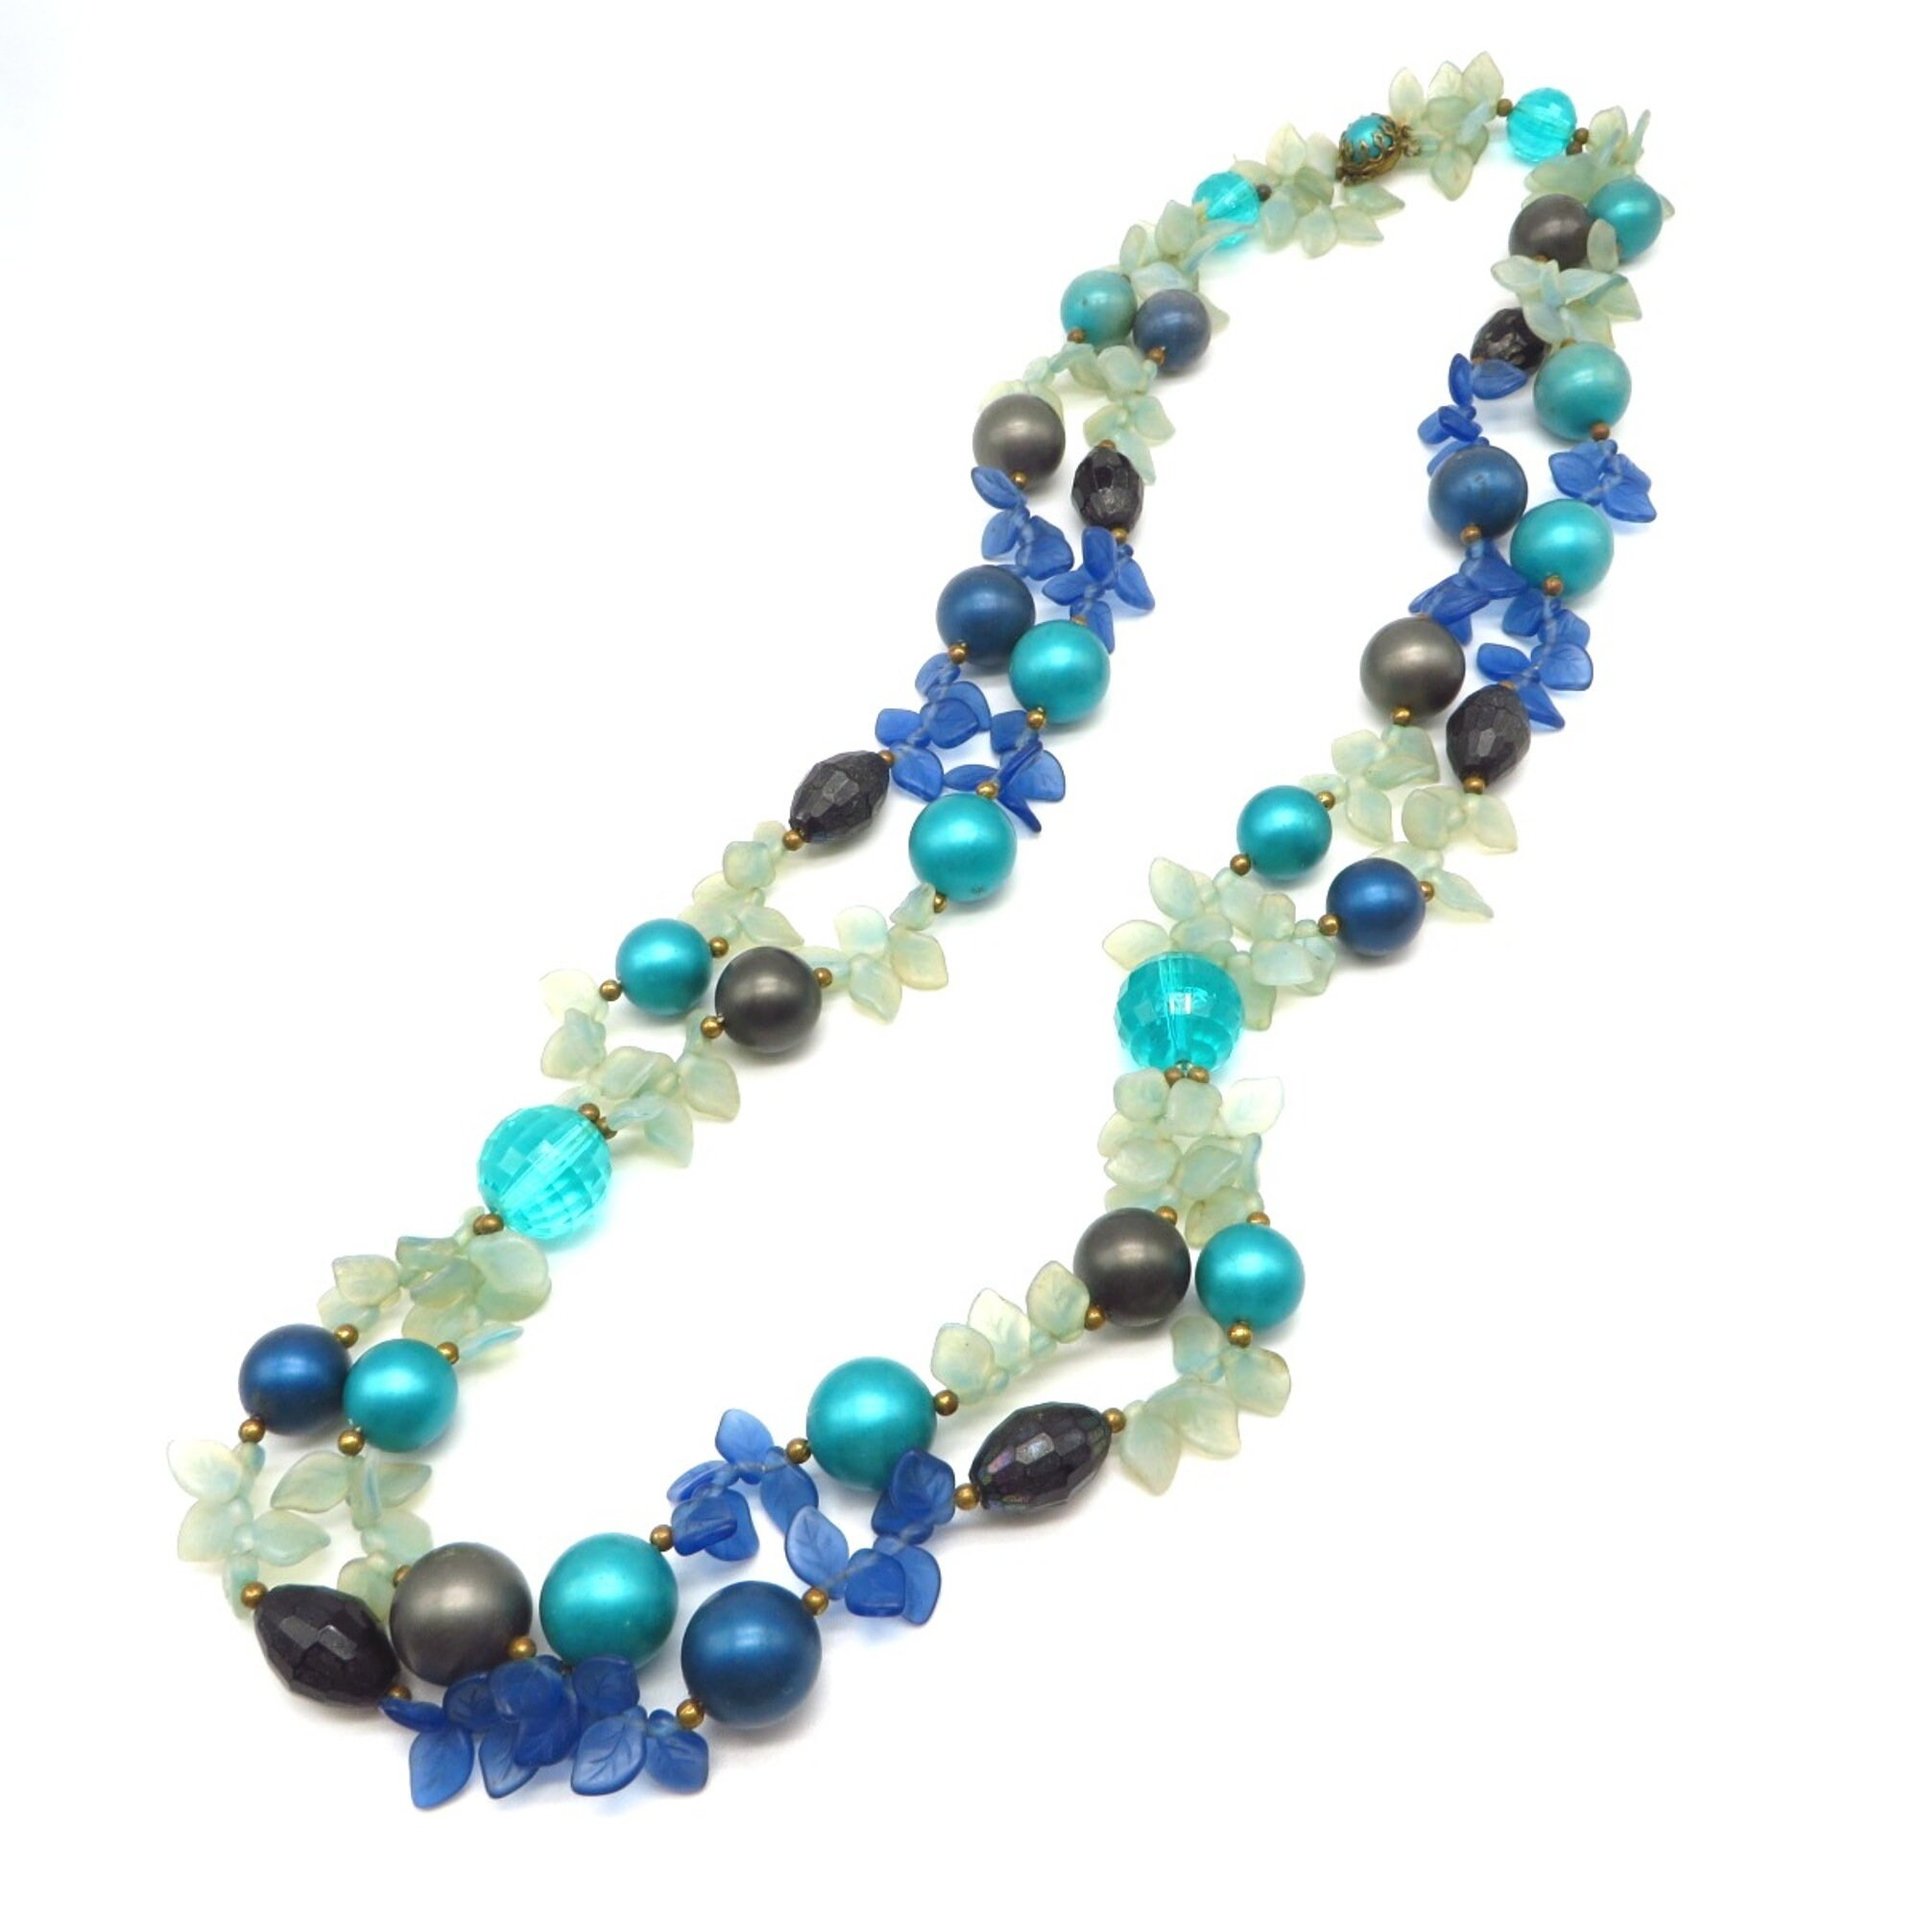 Signed Eugene Multi-Color Bead Necklace, 31 inch length